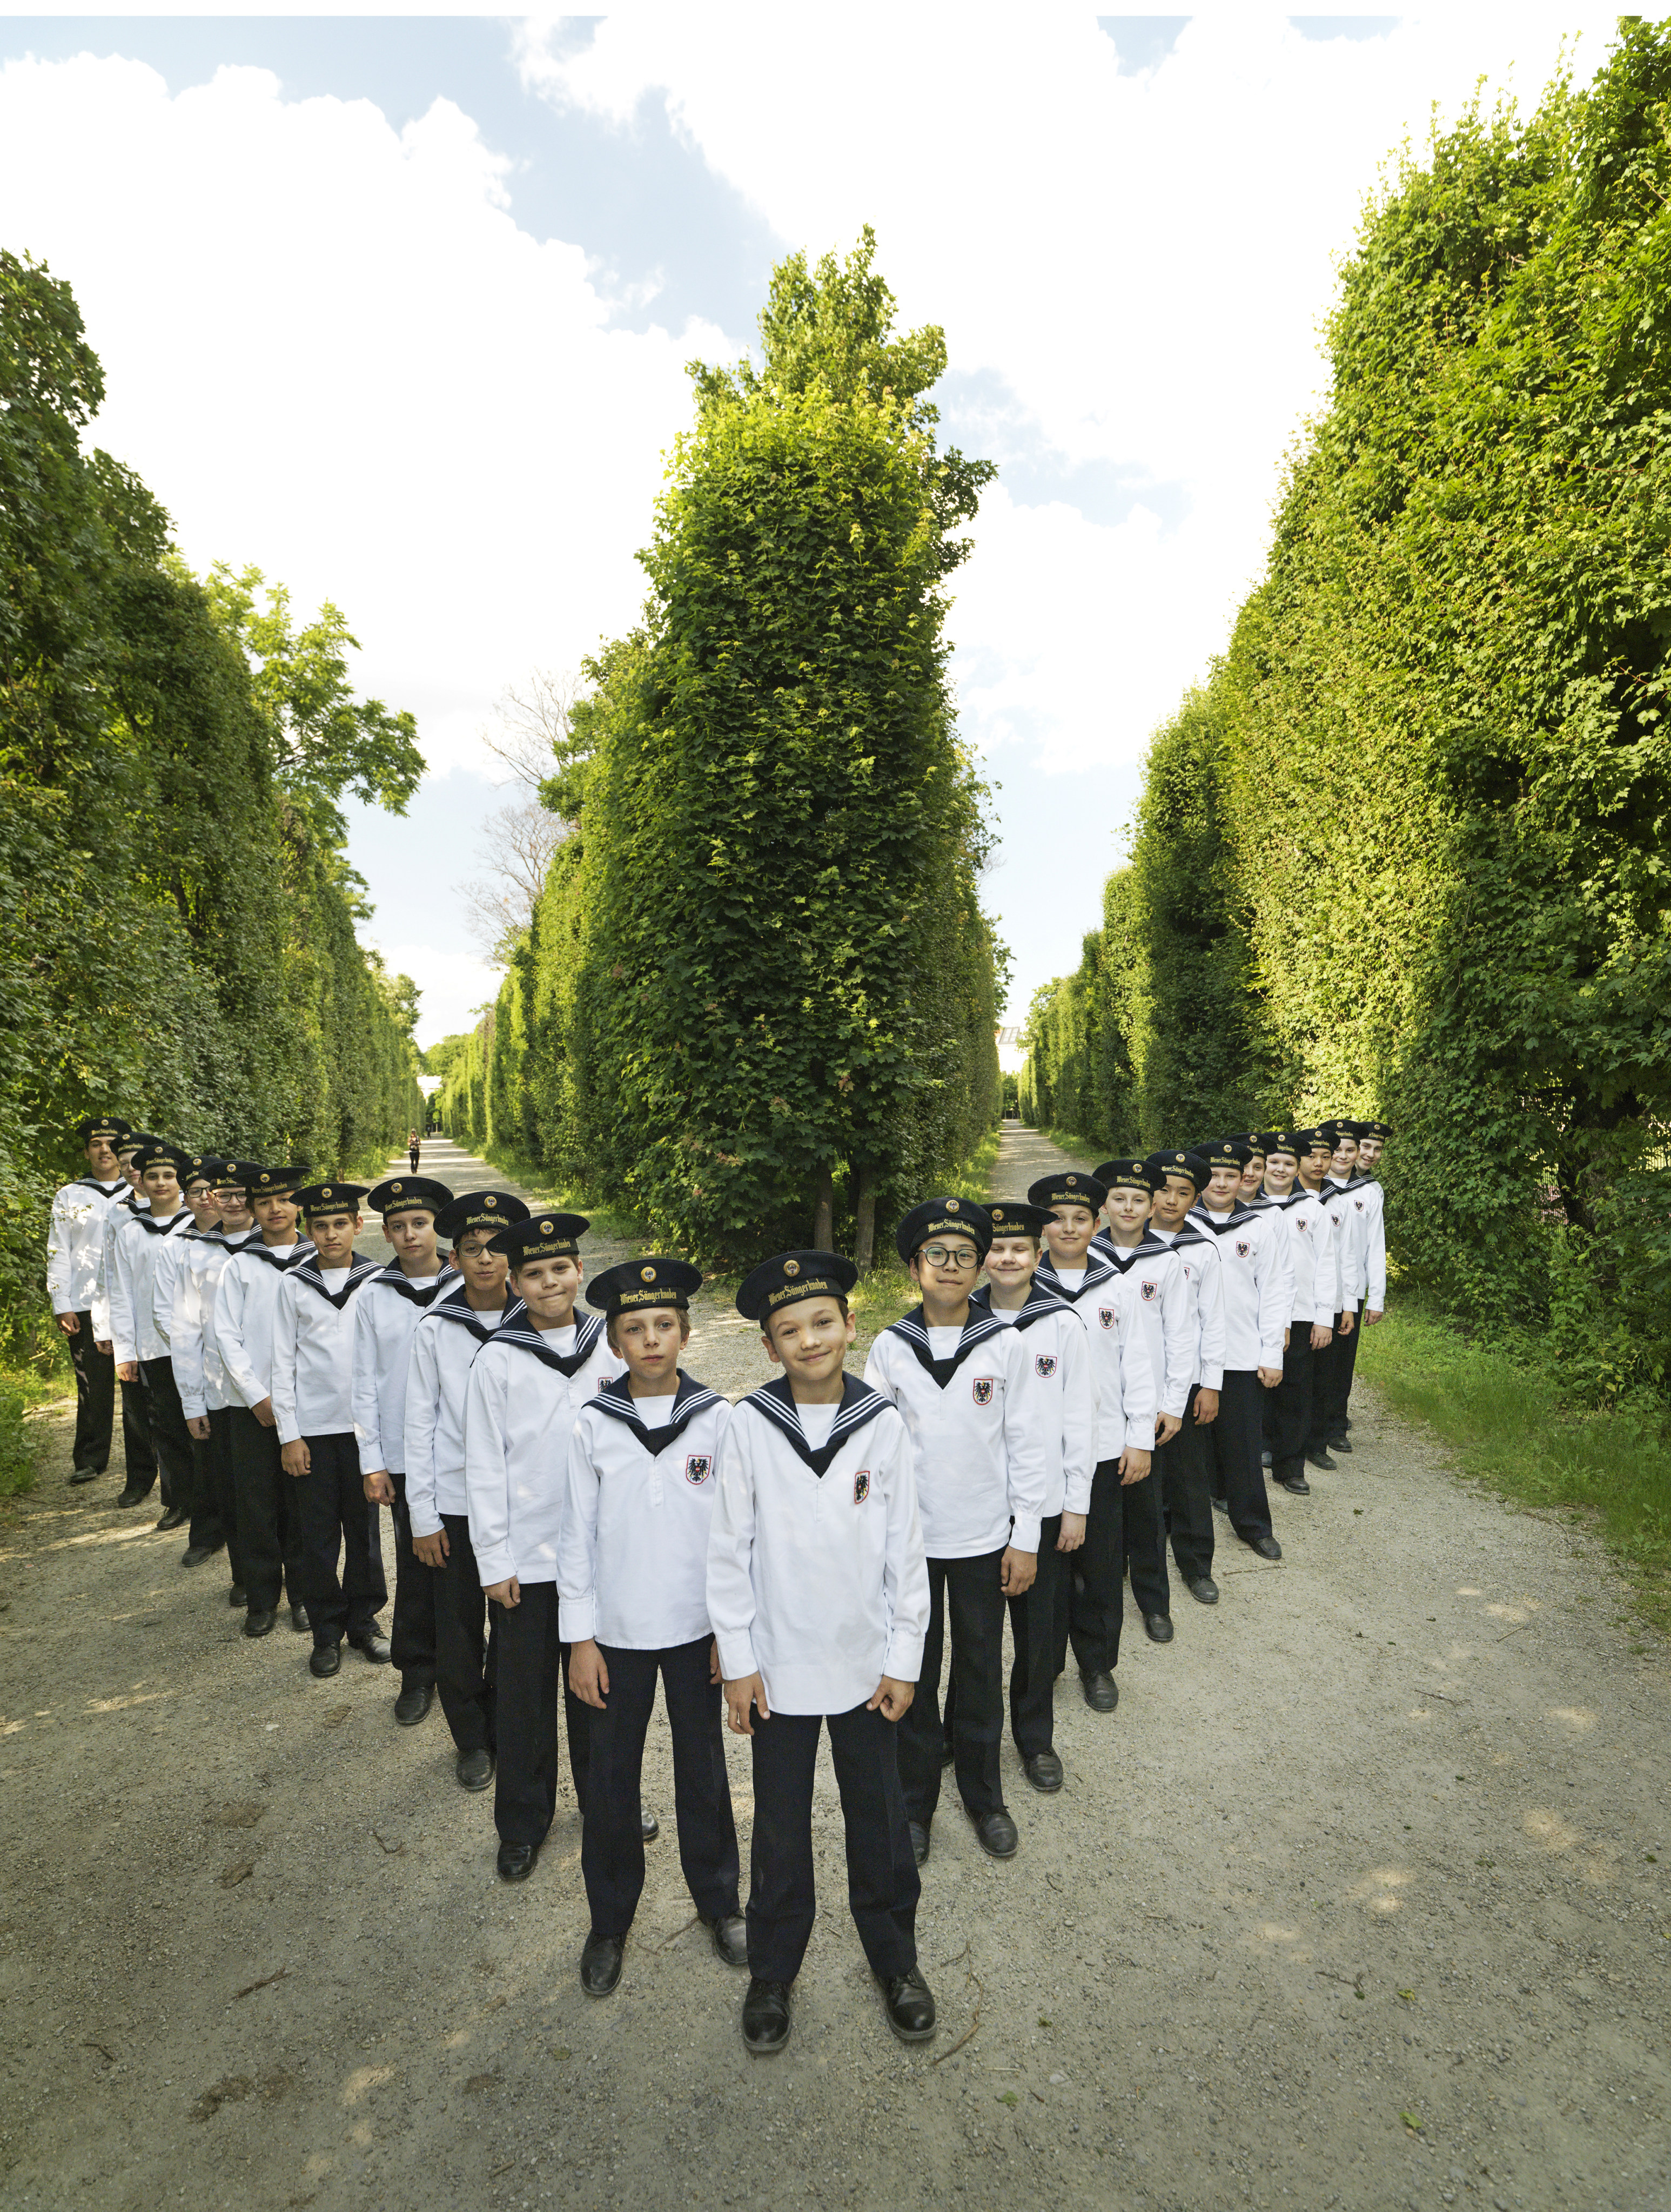 The Vienna Boys Choir, returning to Hong Kong as part of a world tour to mark its 525th anniversary, has been through many changes since its early days. Photo: courtesy of the Vienna Boys Choir